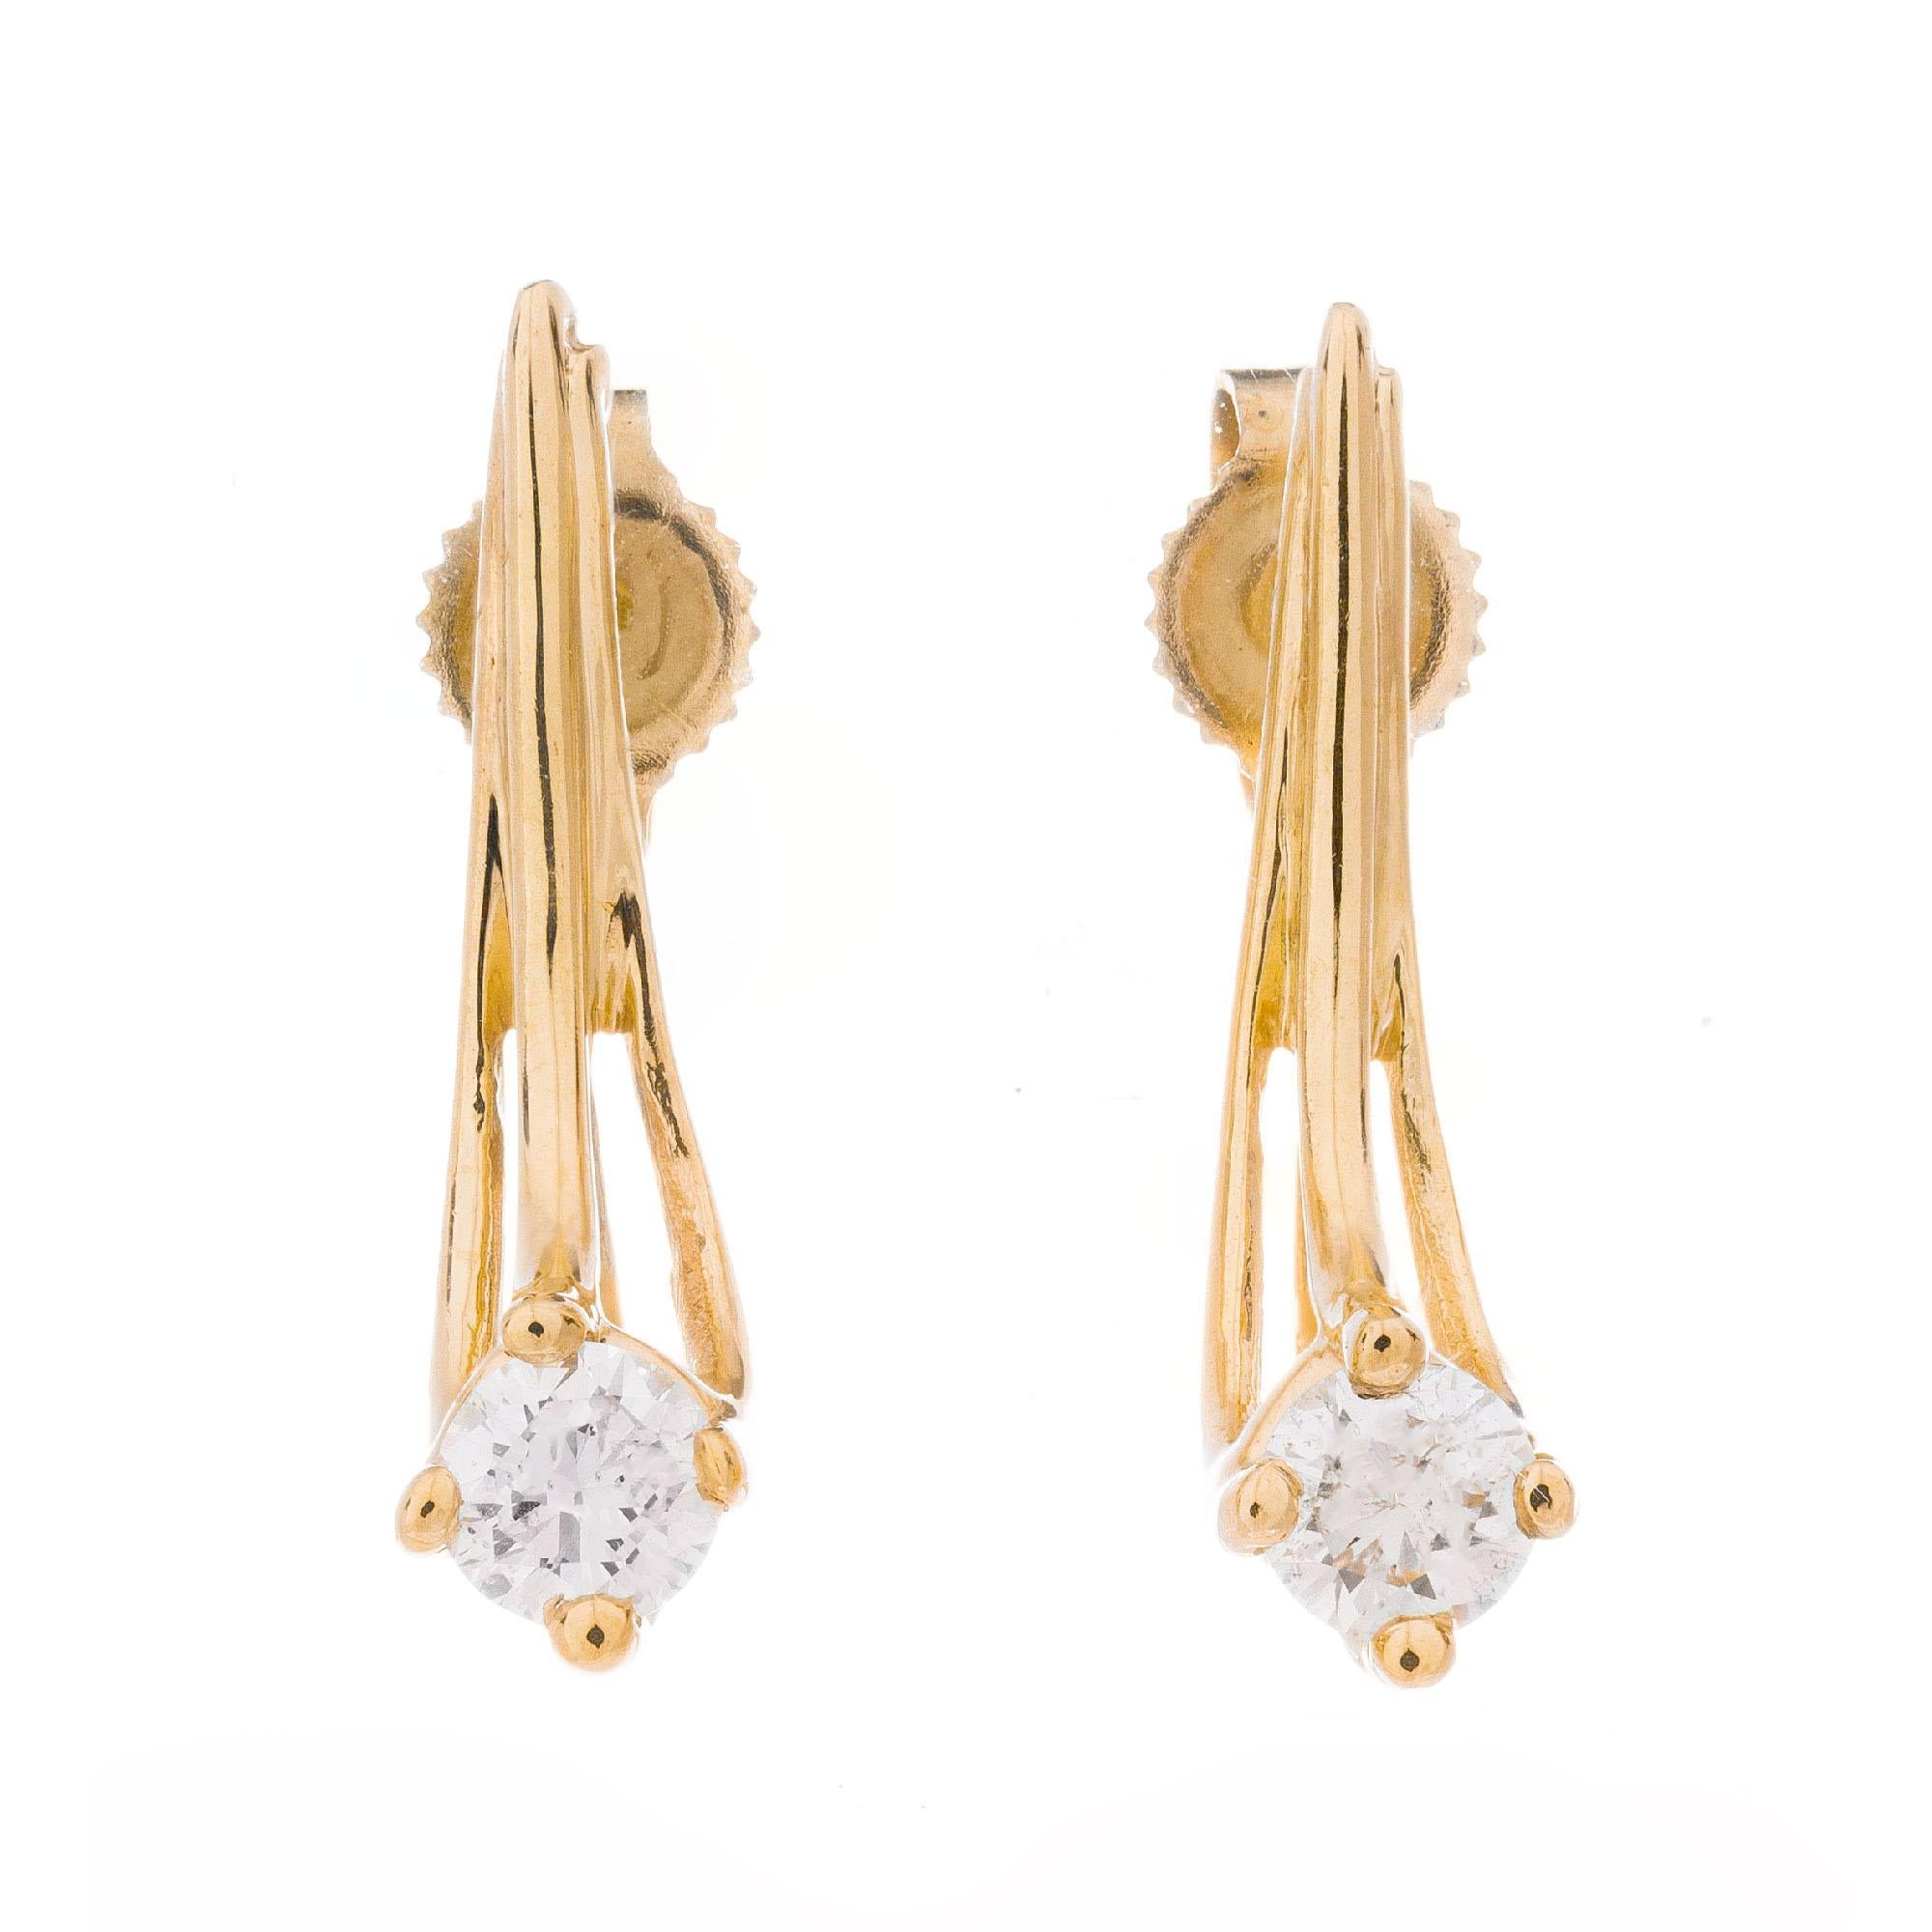 Handmade four prong earrings. Wire design setting with two round diamonds in 14k yellow gold.

2 round diamond, H SI approx. .30cts
14k yellow gold 
Stamped: 14k
1.4 grams
Top to bottom: 17.41mm or .69 Inch
Width: .18 Inches
Depth or thickness: